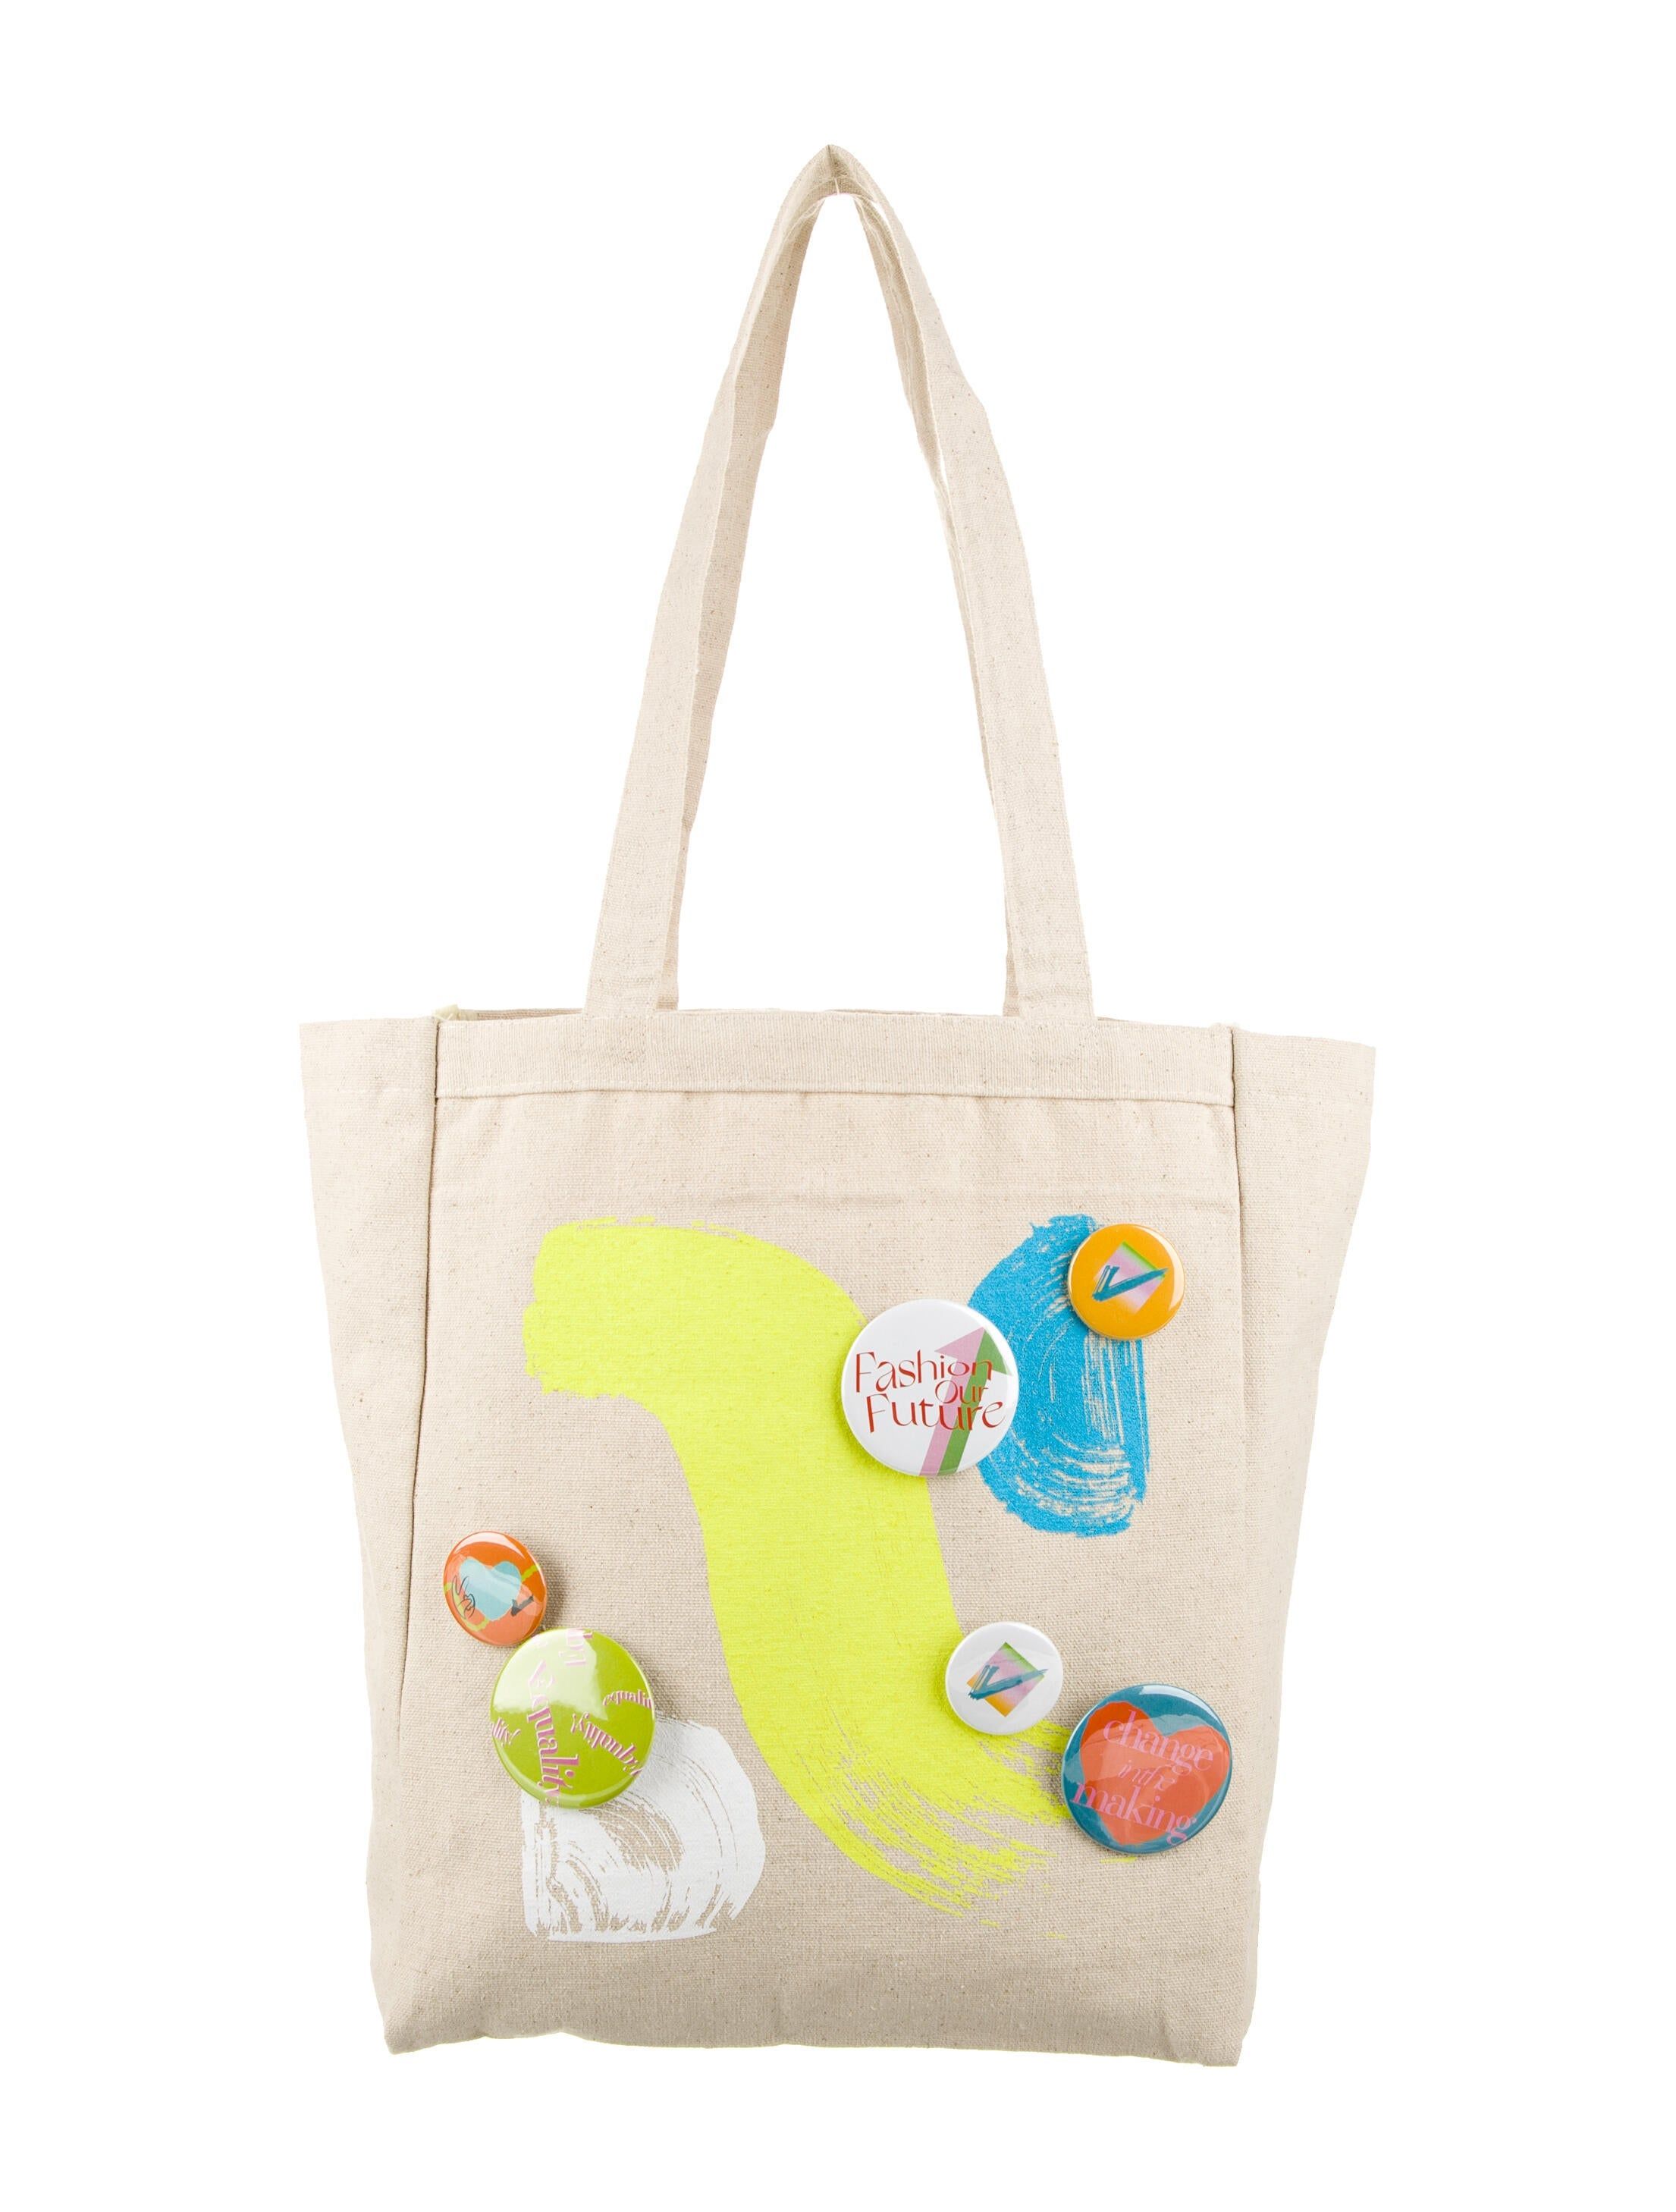 "The Right to Tote" Tote Bag